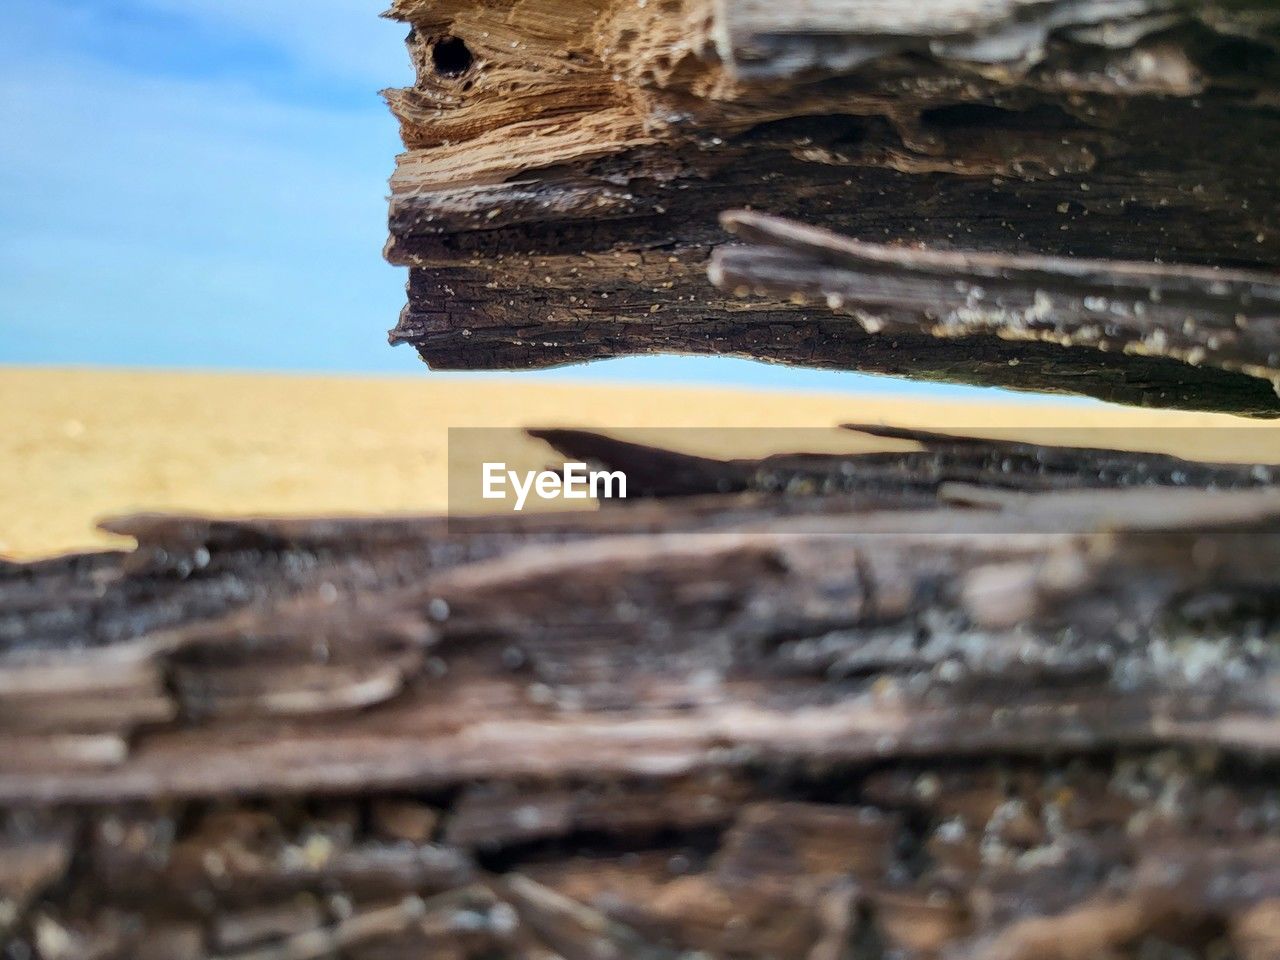 wood, nature, no people, water, day, land, rock, selective focus, sea, outdoors, close-up, driftwood, sky, beach, timber, tranquility, log